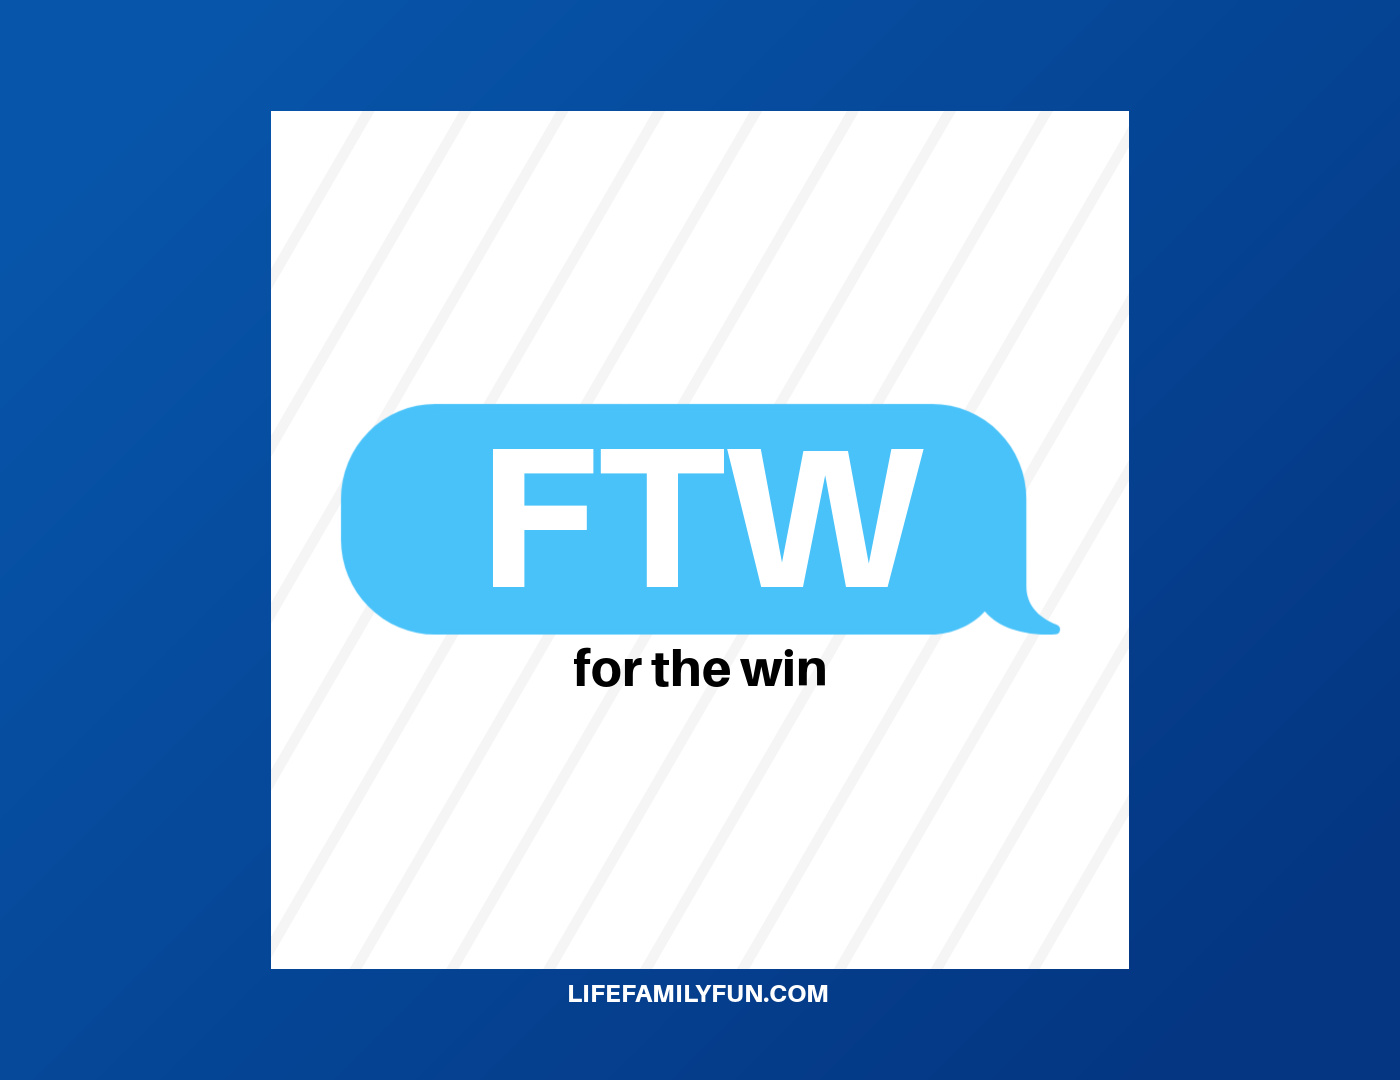 What does FTW mean?